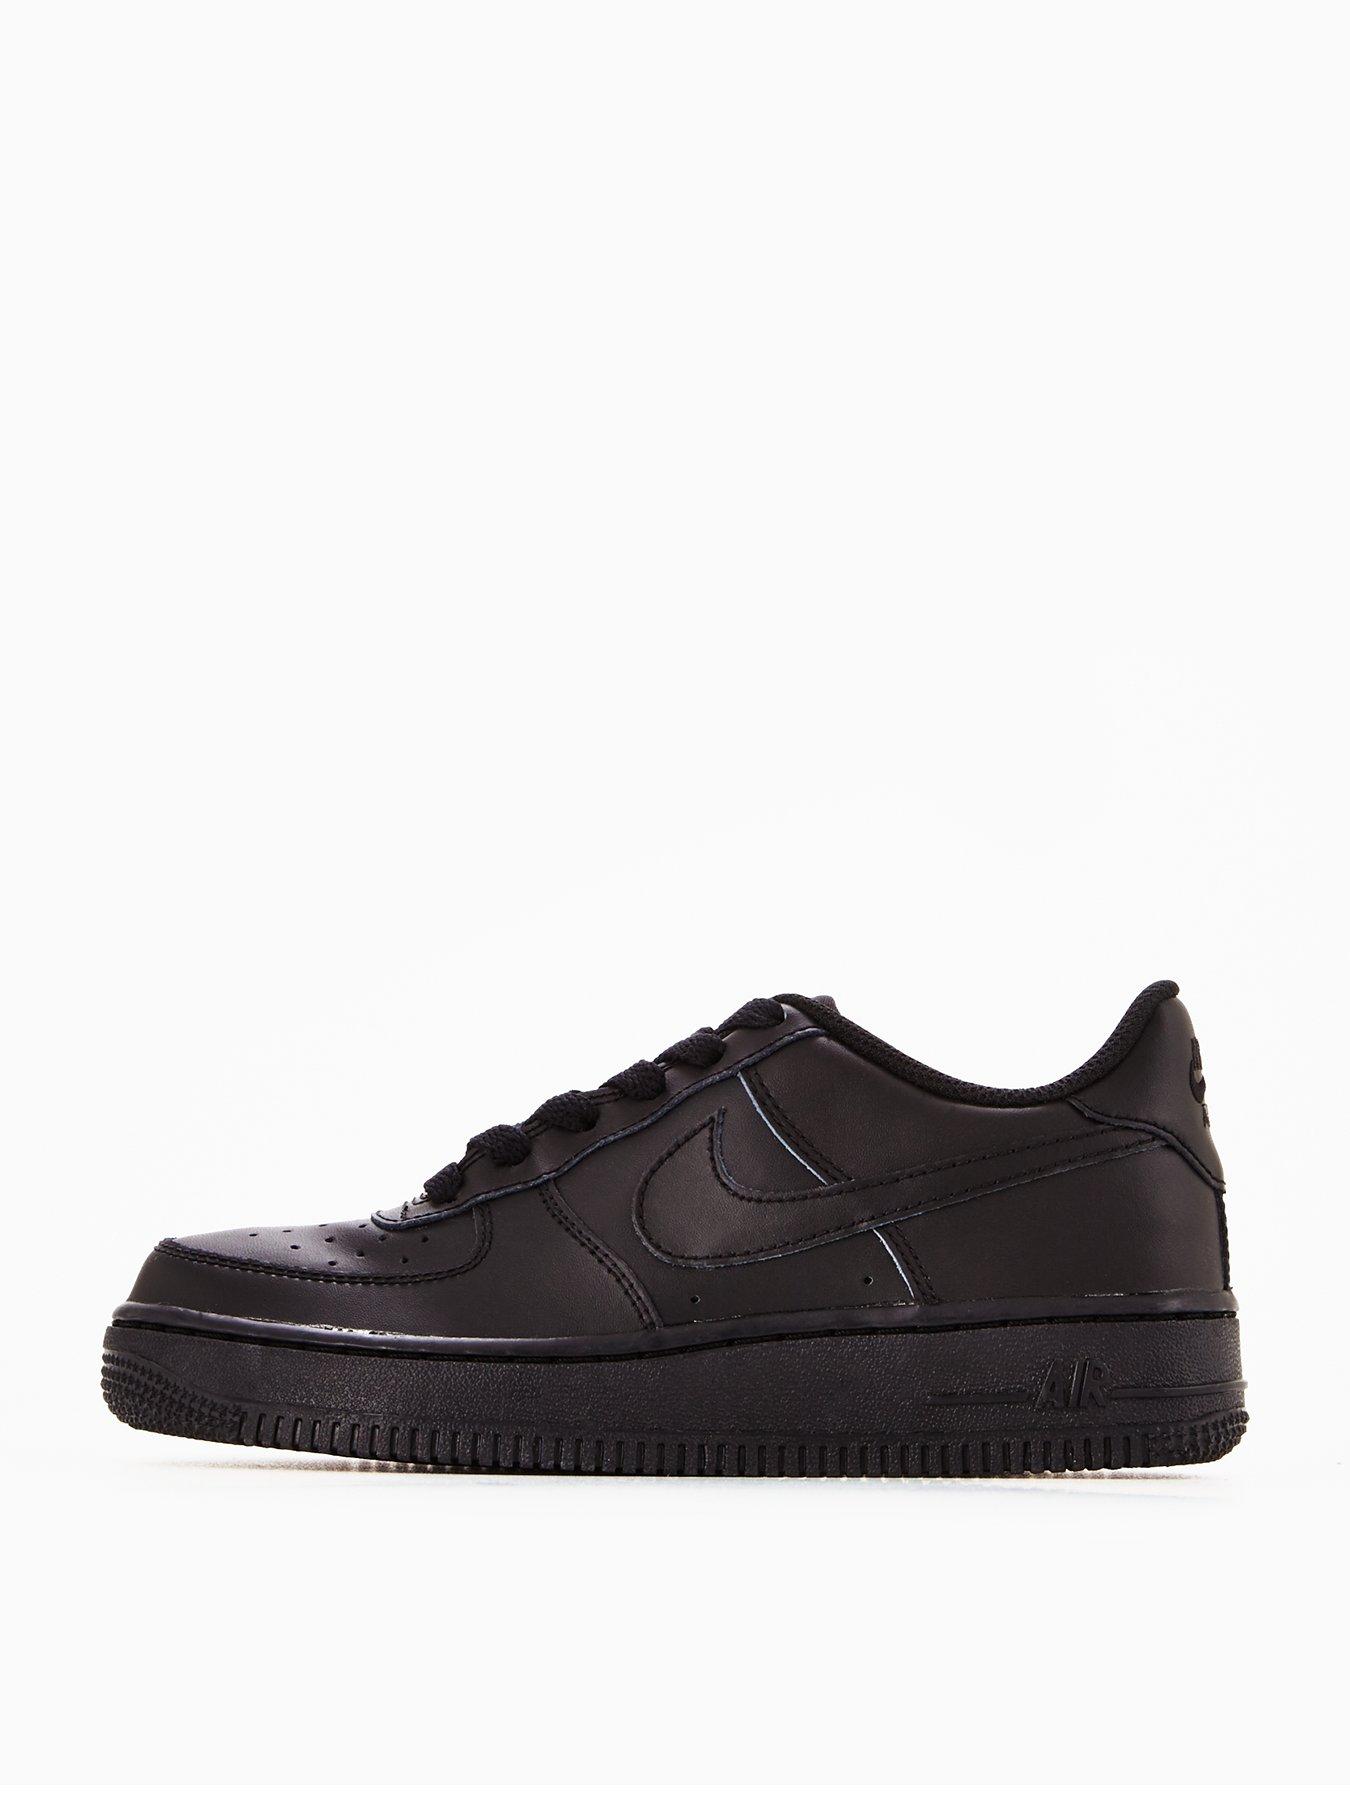 black air force 1 size 2.5